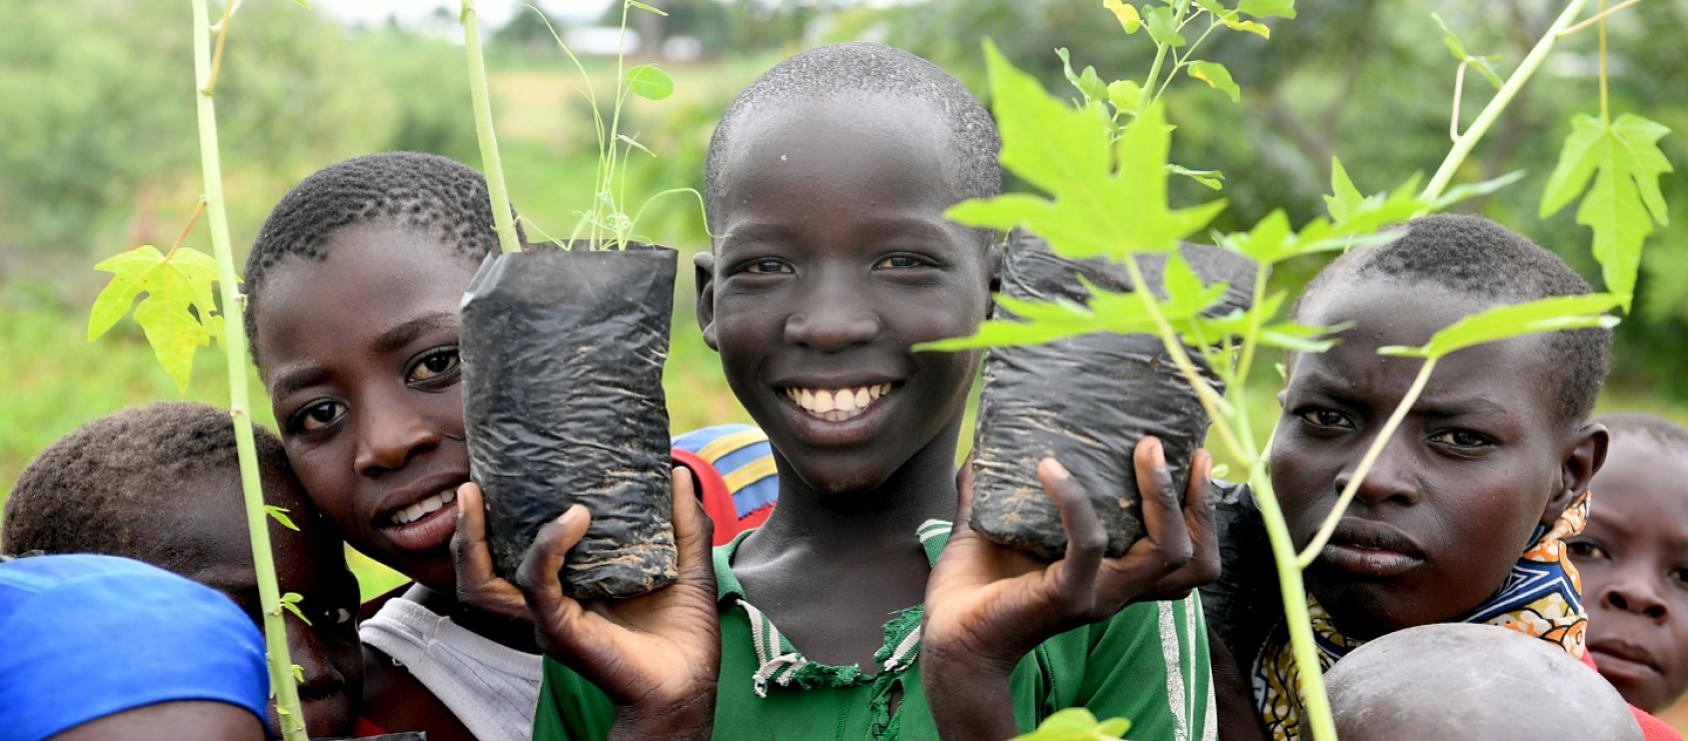 Children in a nursery in Cameroon hold young plants and look at the camera with a big smile on their faces